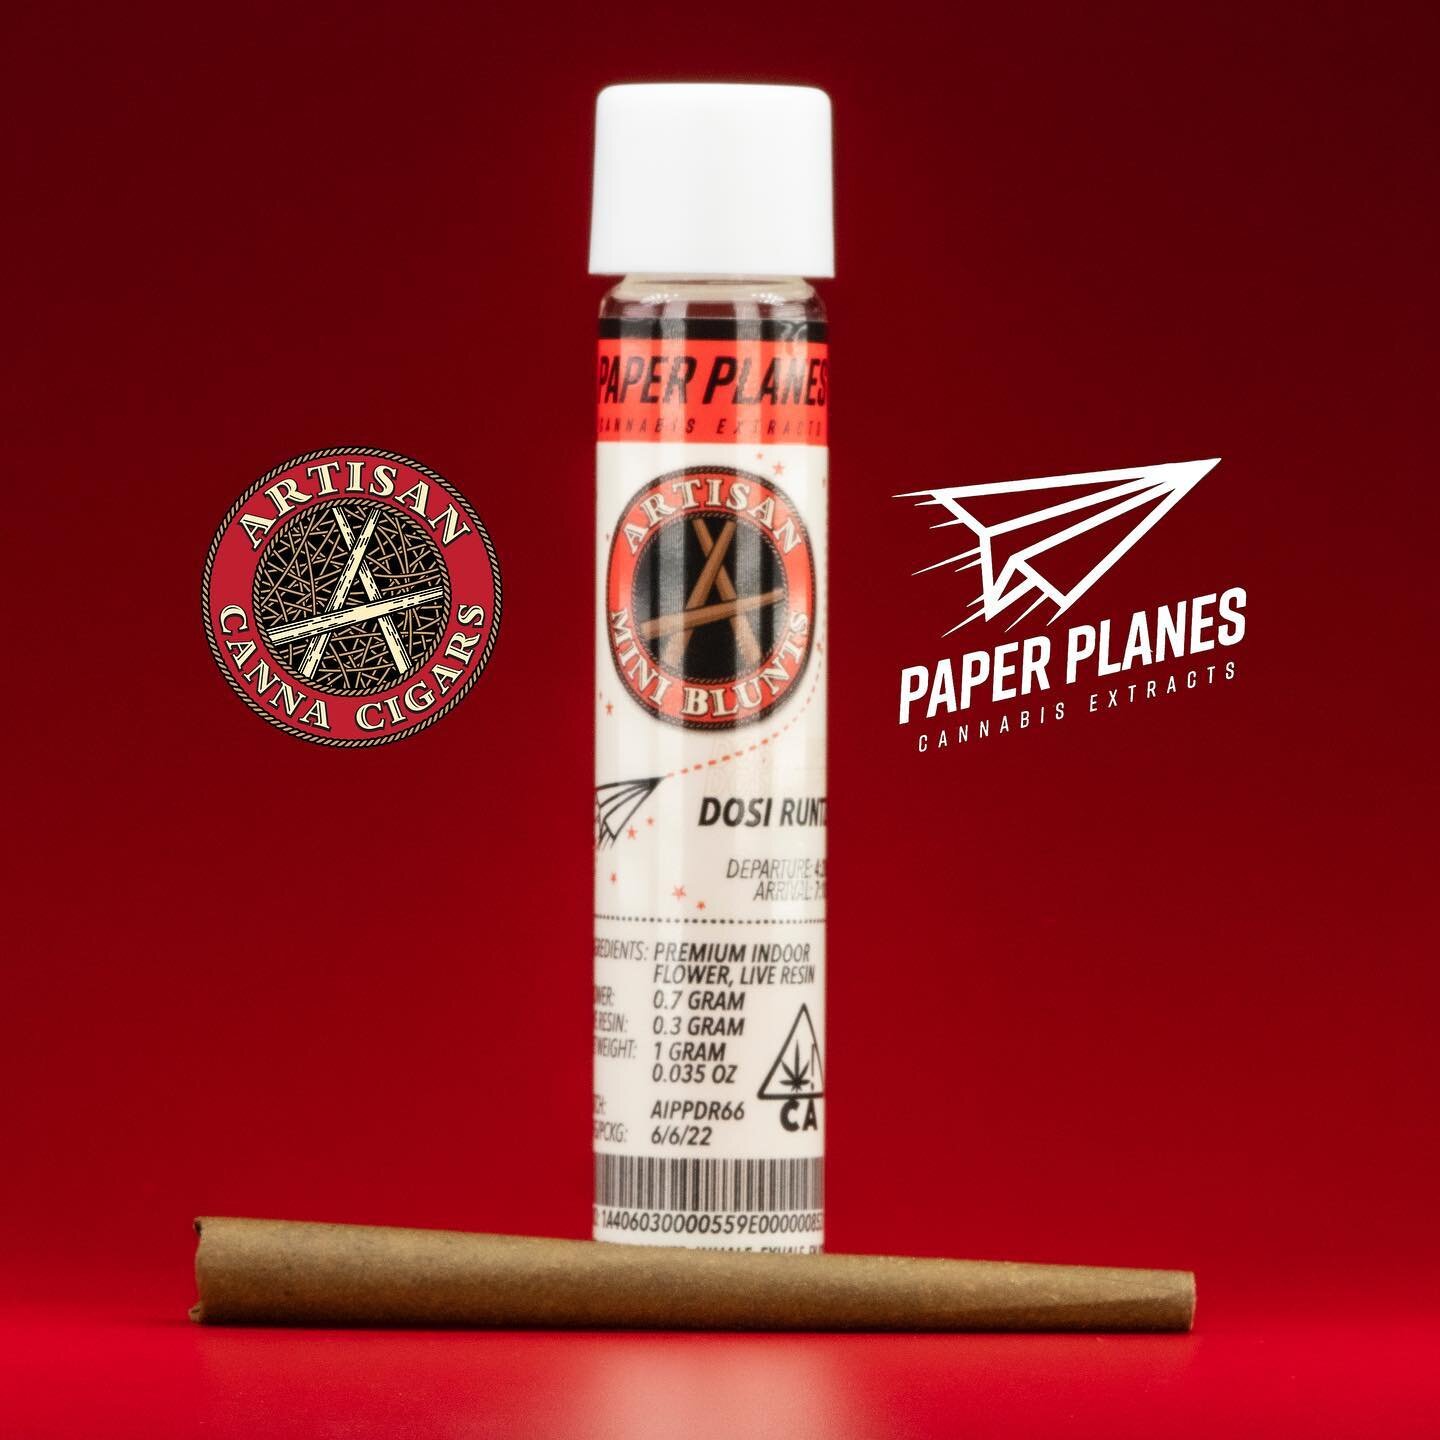 @paperplanes.extracts Infused Mini Blunt taking flight ✈️! Another 🔥 collab! #KingOfCollabs